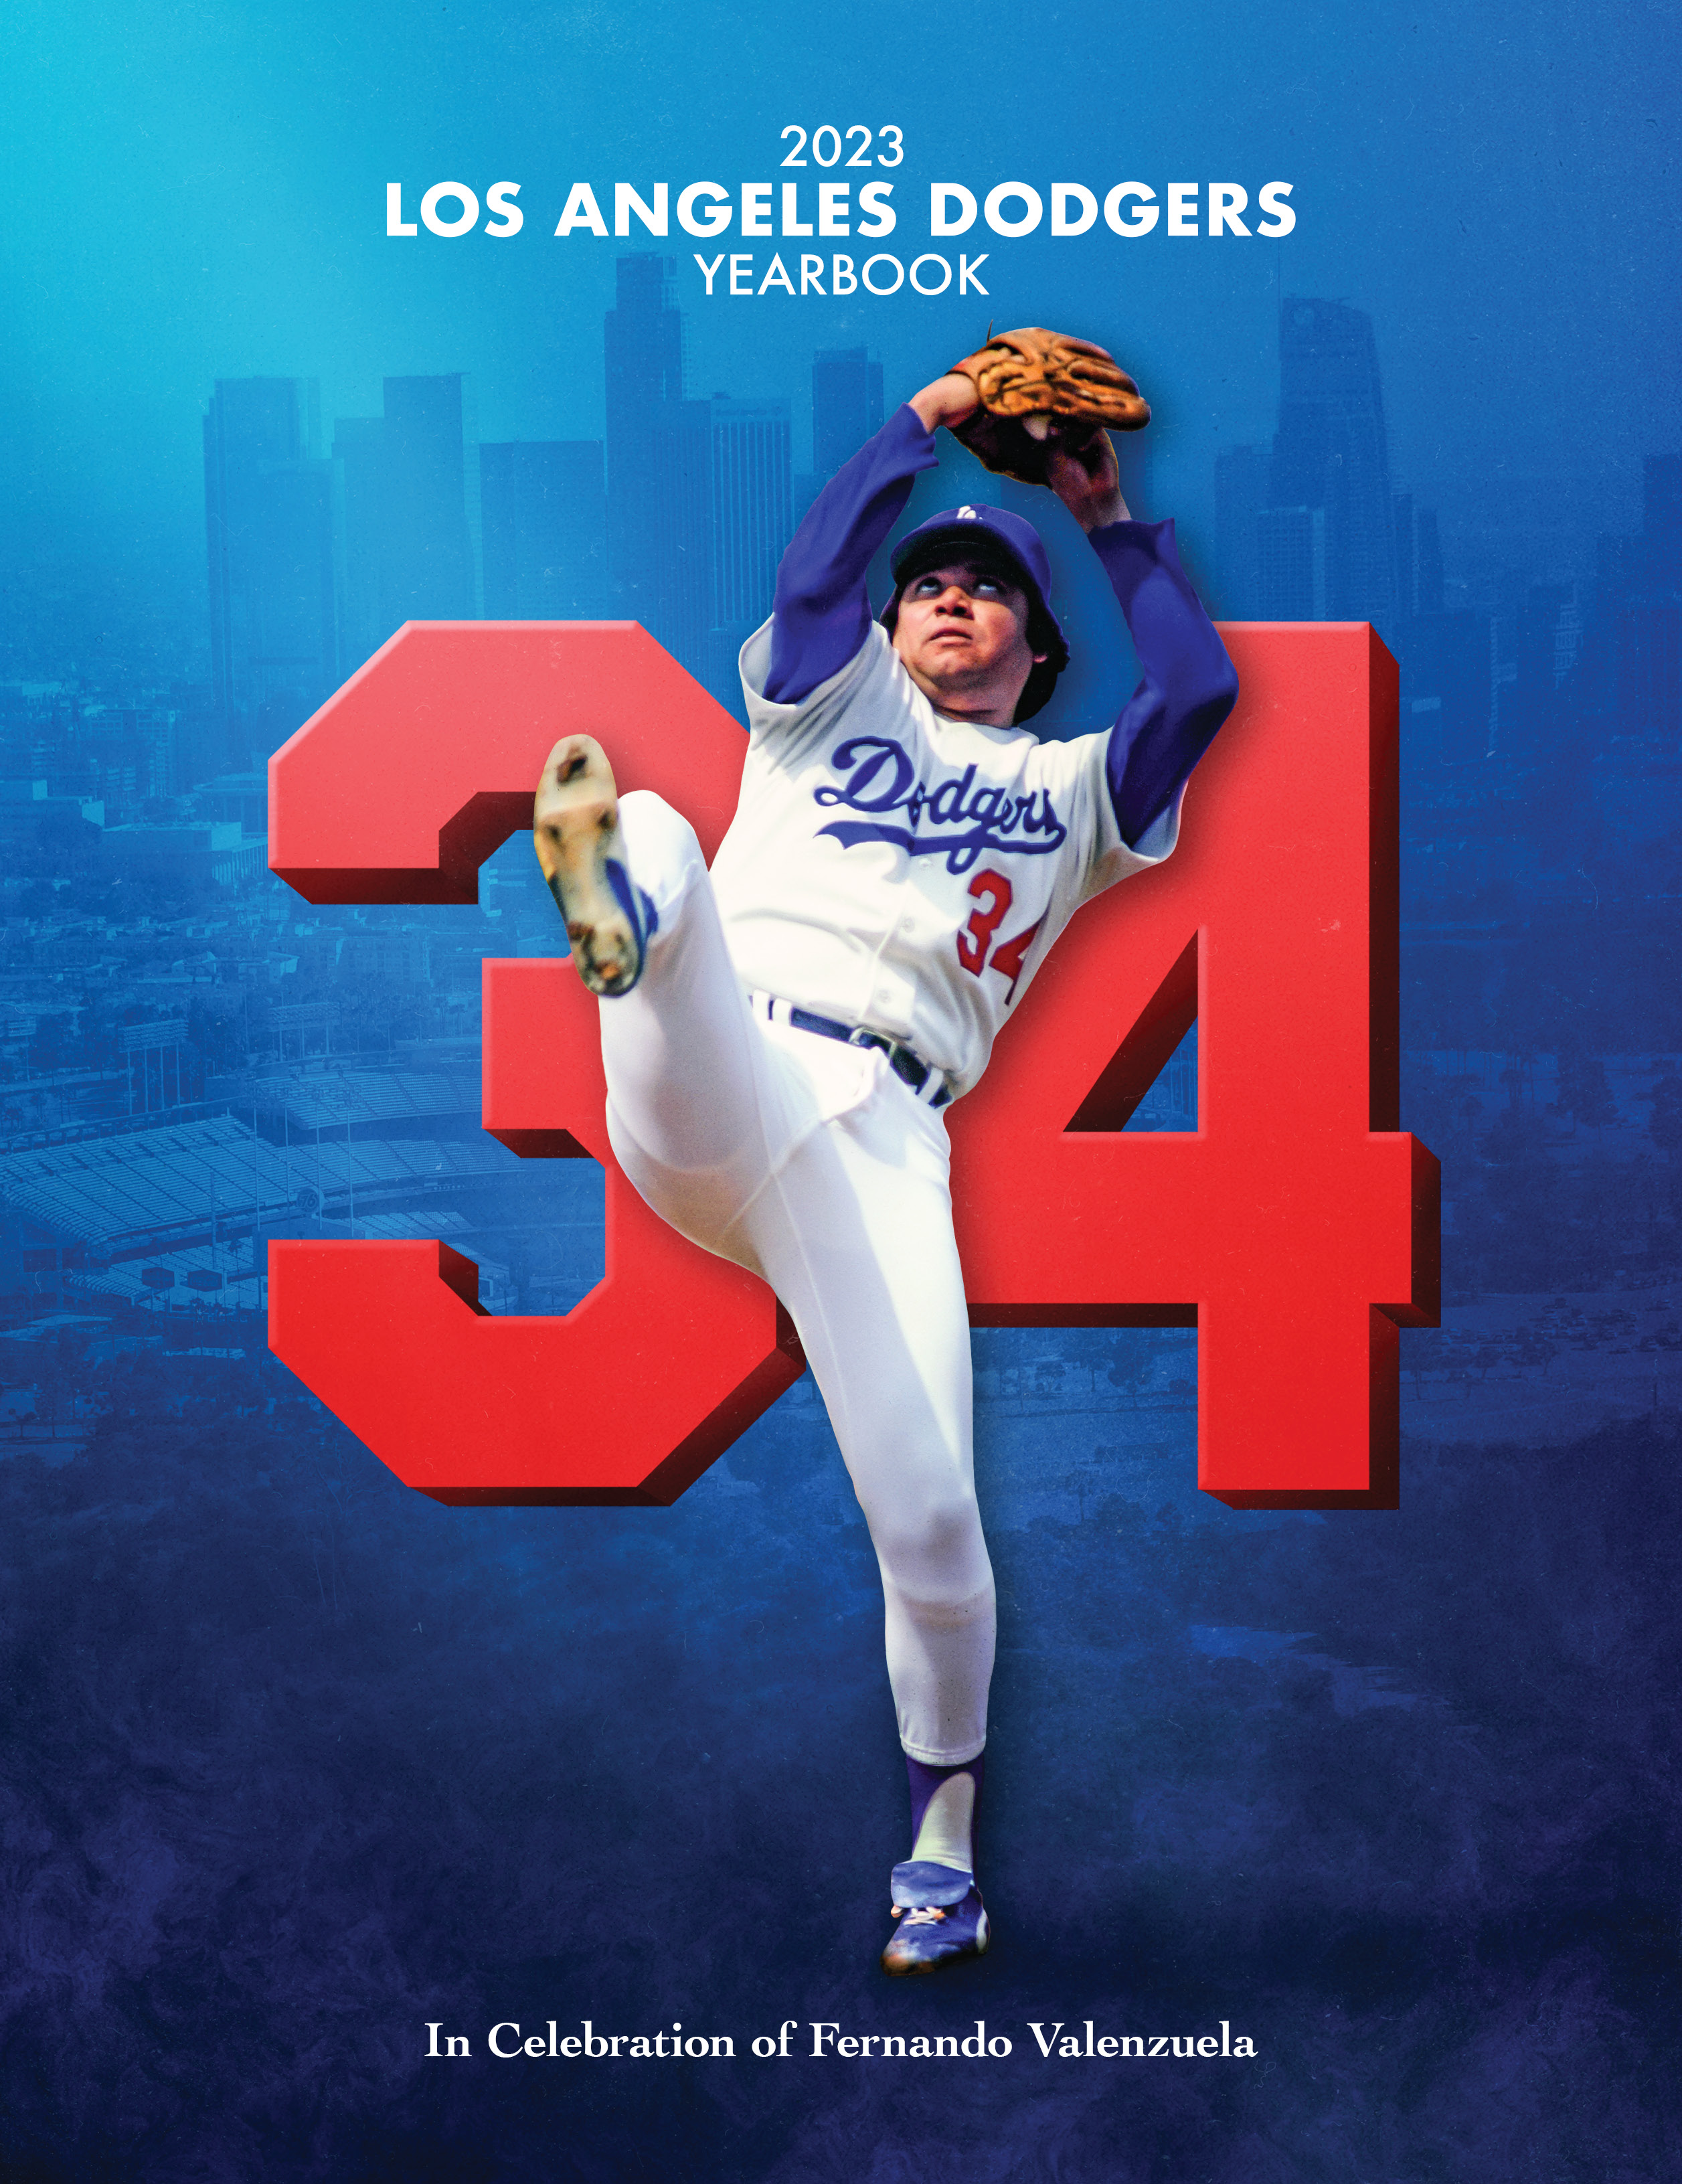 Introducing the 2022 Dodgers Yearbook - Dodger Insider